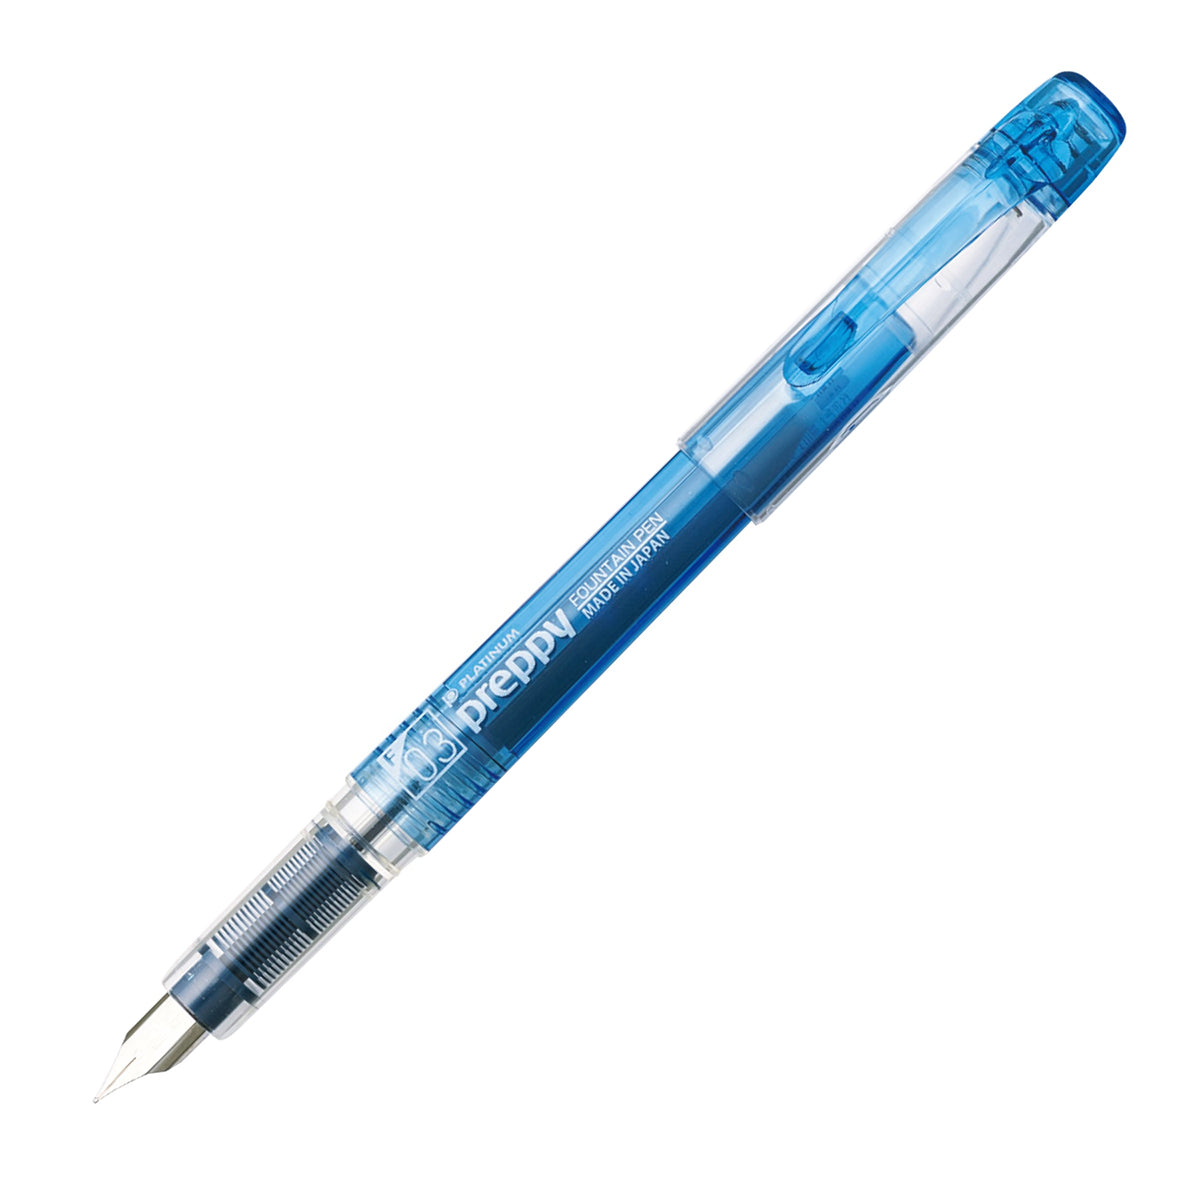 0.5mm Fine Tip Writing Pen with Black Gel Ink by Archer and Olive